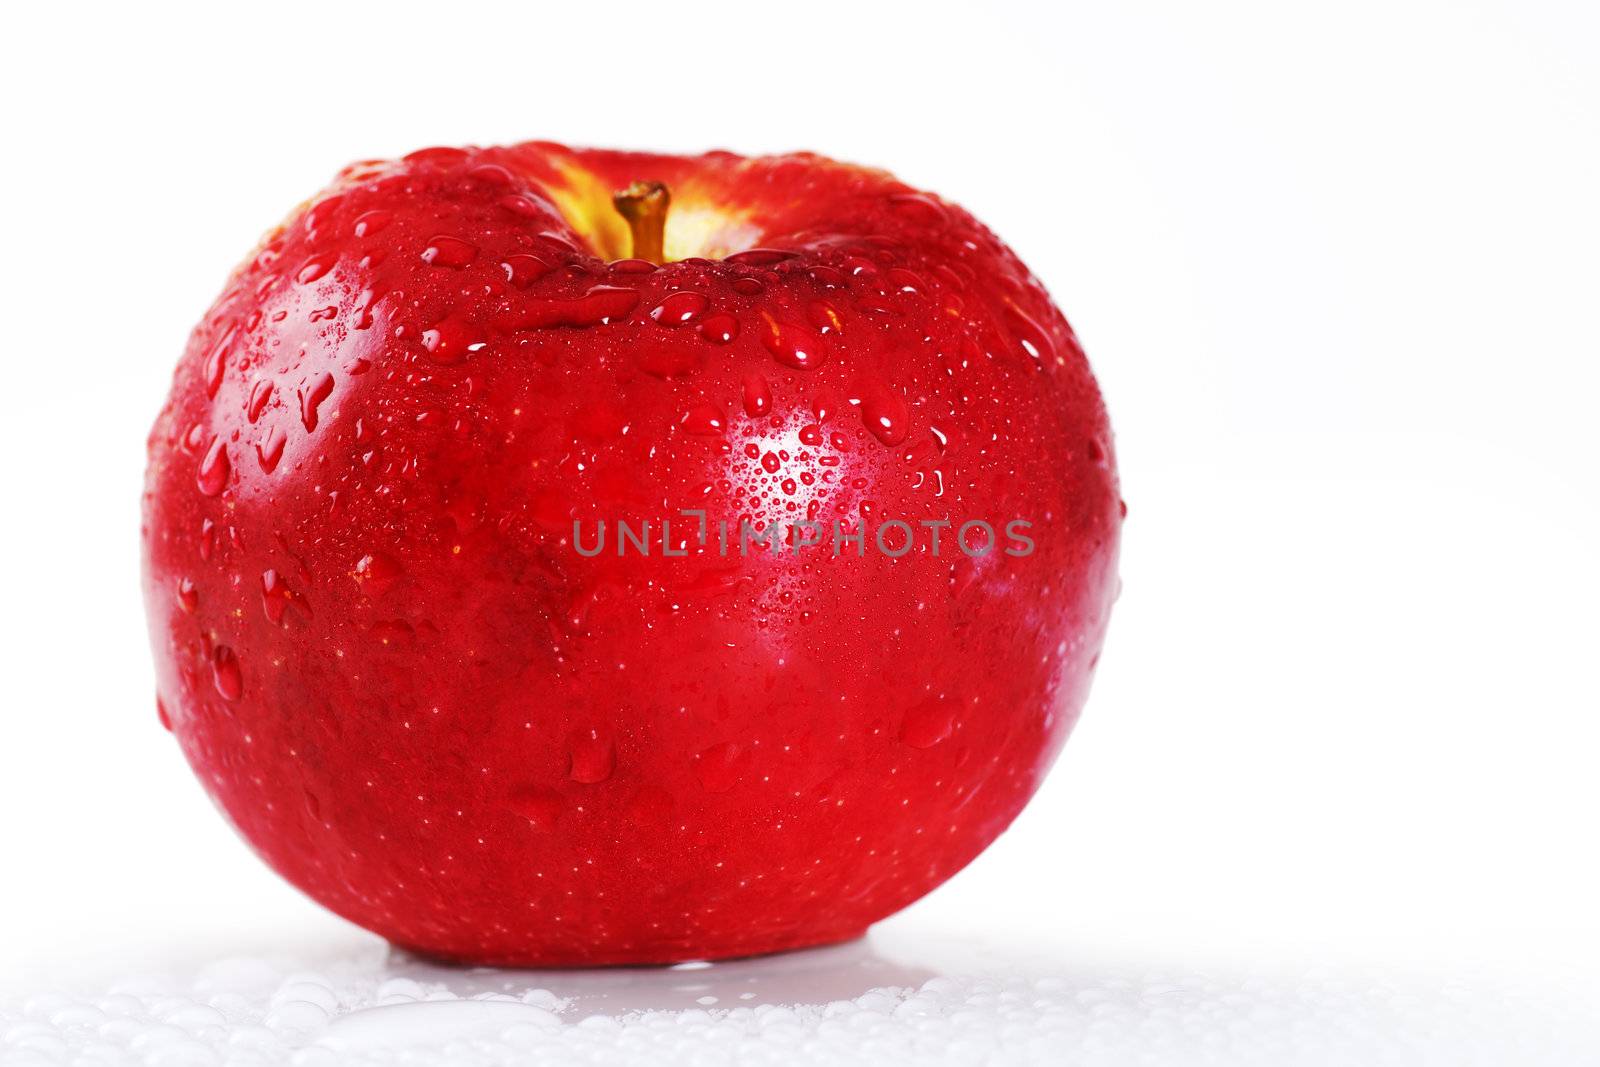 Beautiful studio shot of a fresh and wet red apple with water droplets dripping off it over white, perfect nutrition or diet background.